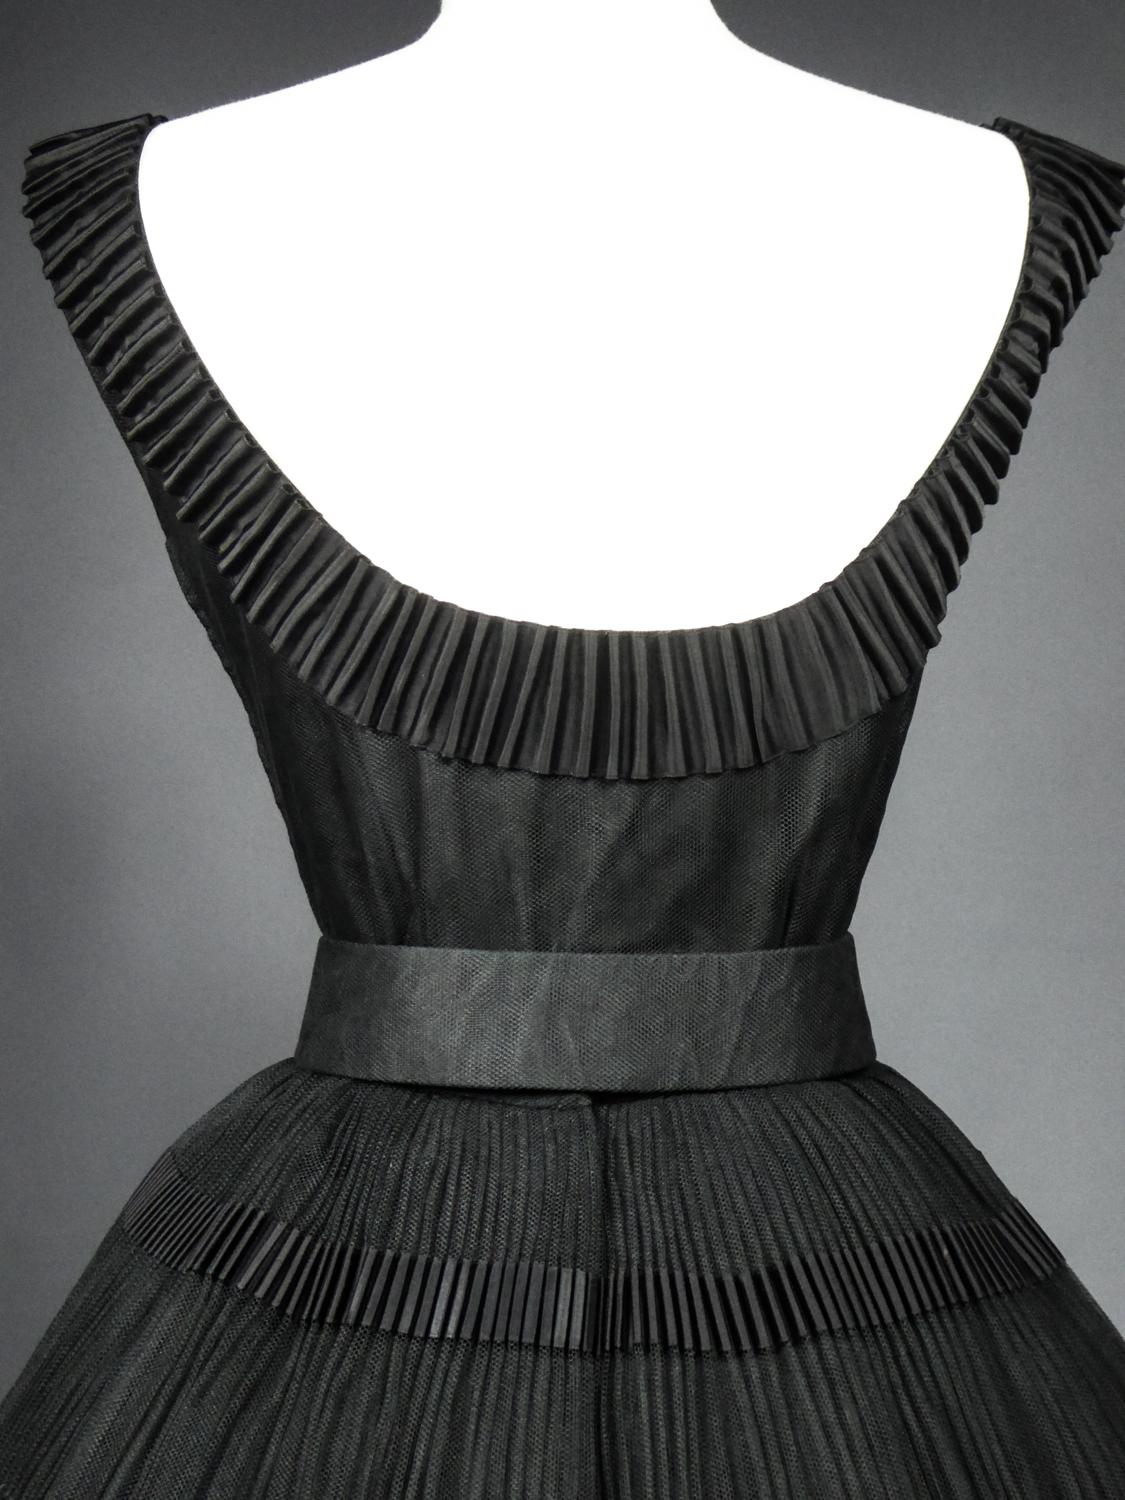 A Nina Ricci Couture Cocktail Dress in Embossed Tulle and Ribbon Circa 1958/1962 4